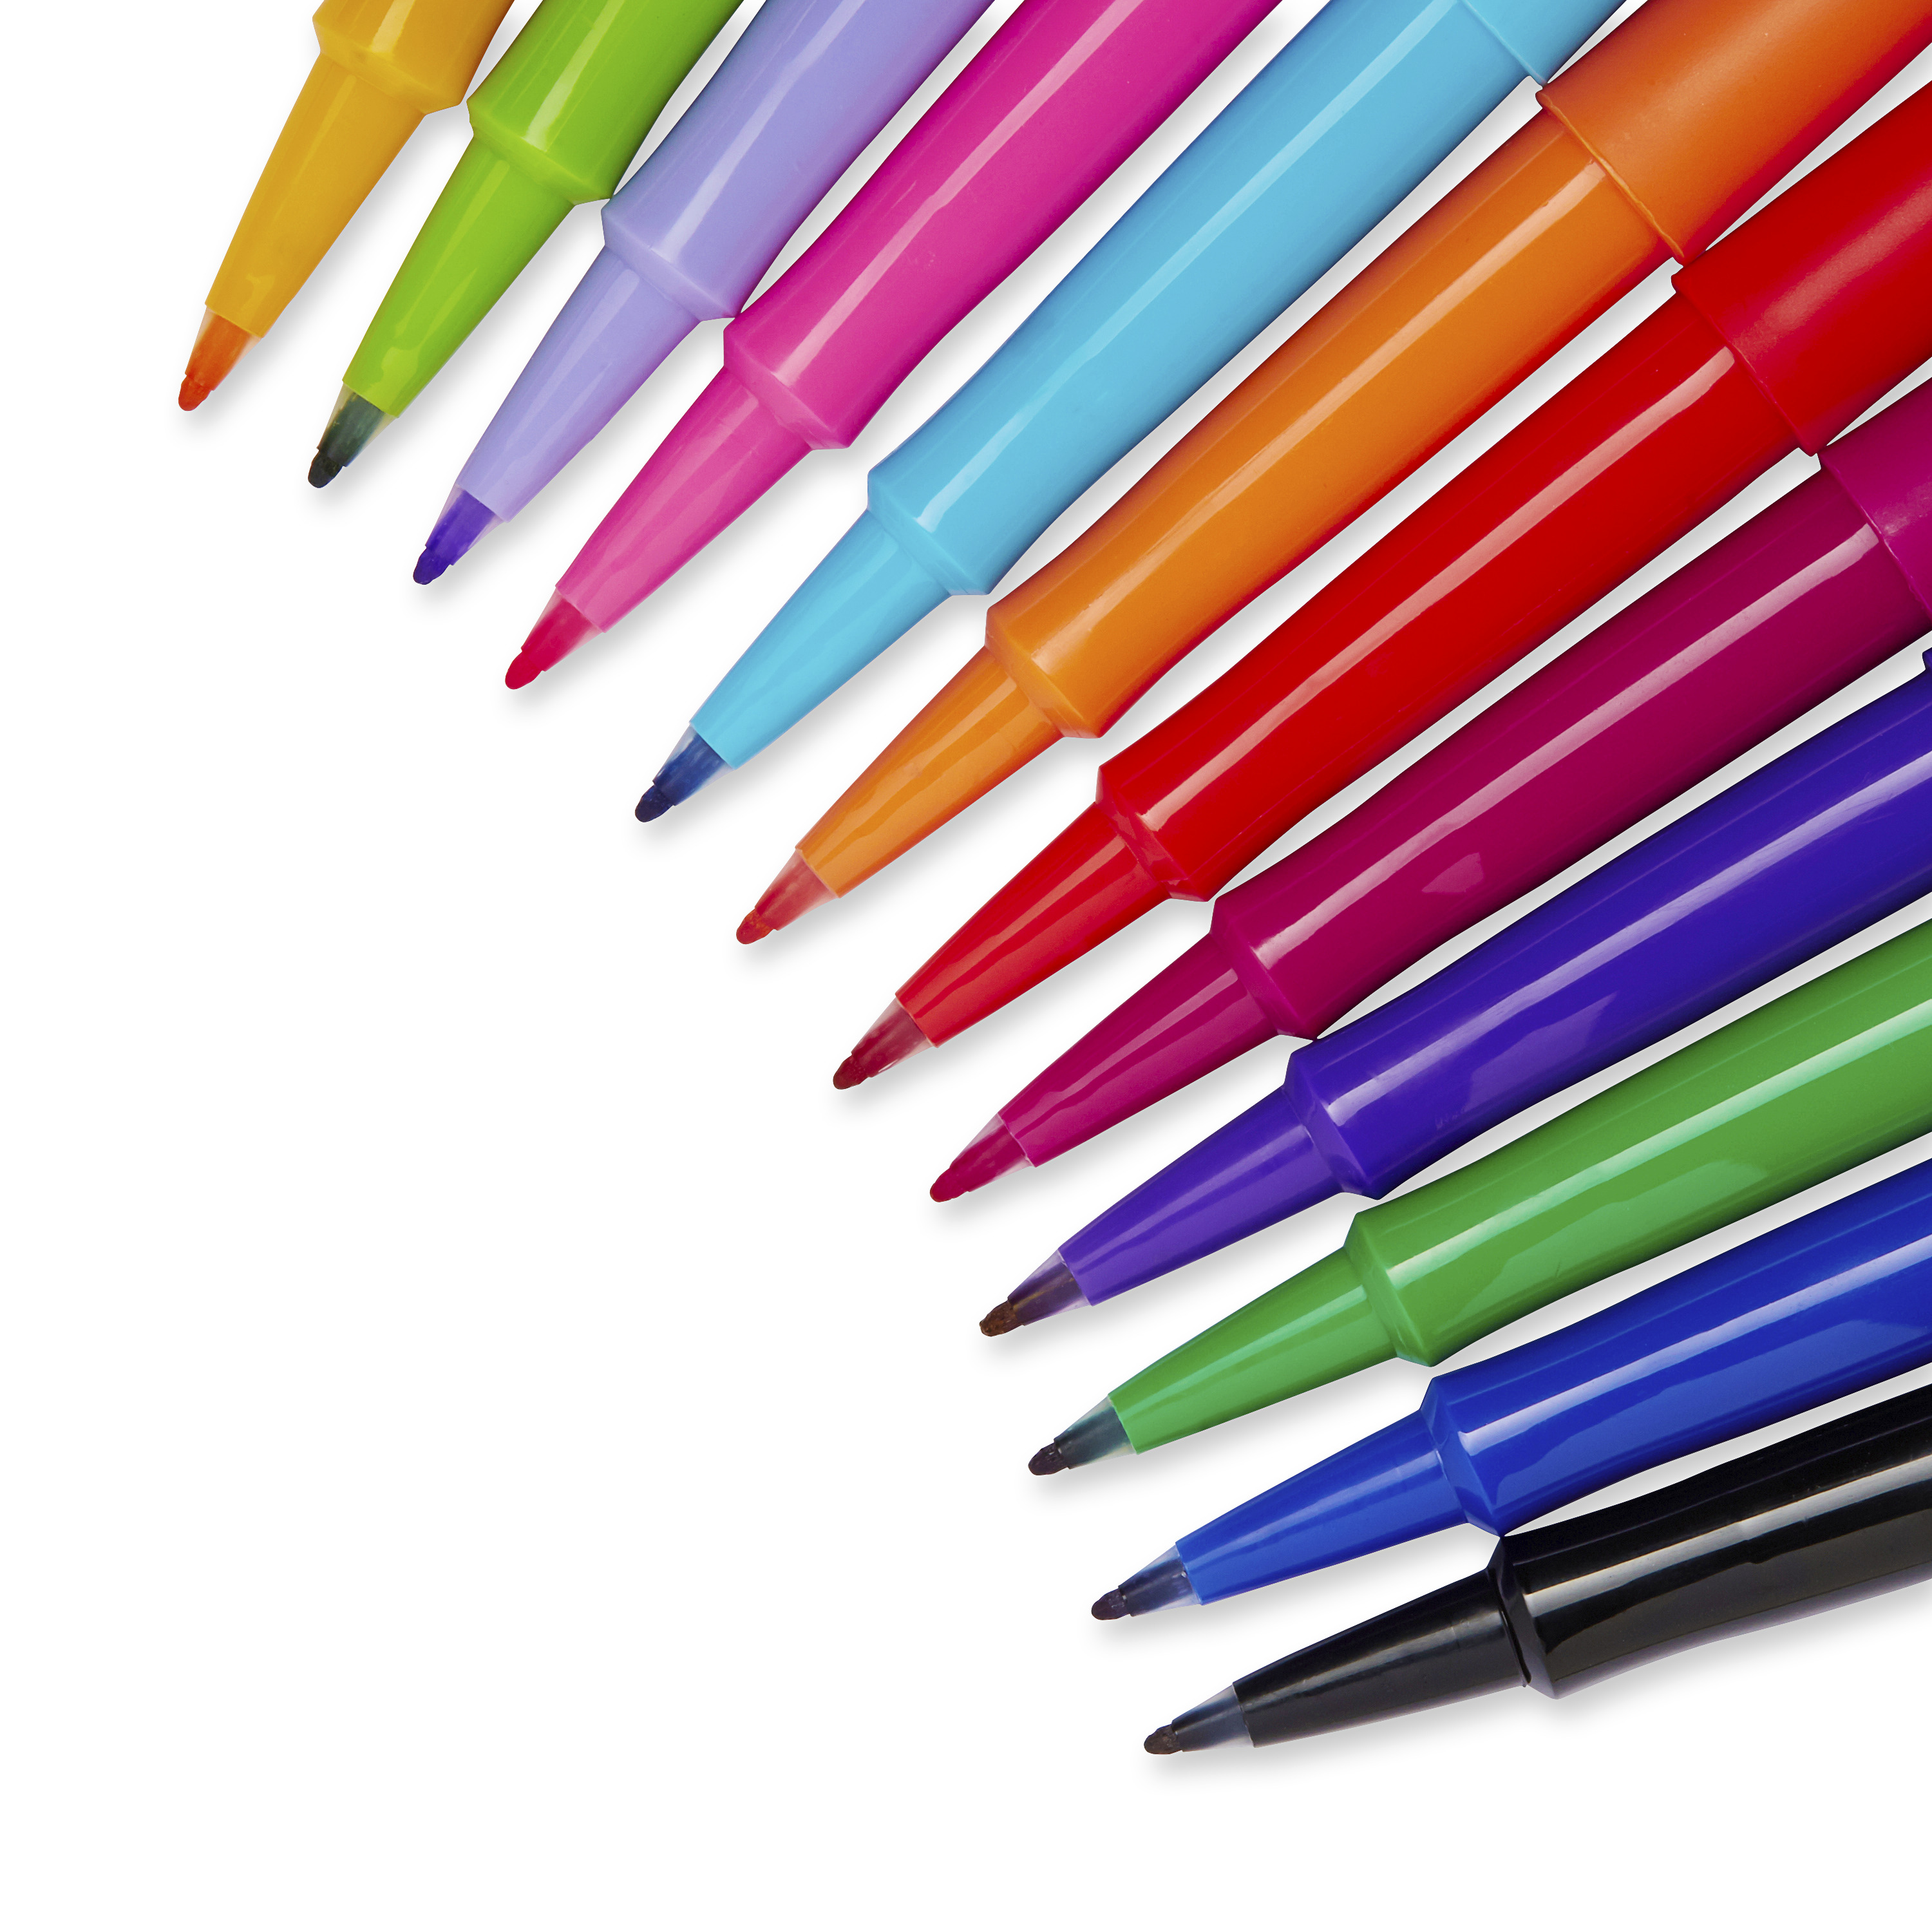 Paper Mate Flair Felt Tip Pens, Medium Point (0.7mm), Assorted Colors, 12 Count - image 4 of 11